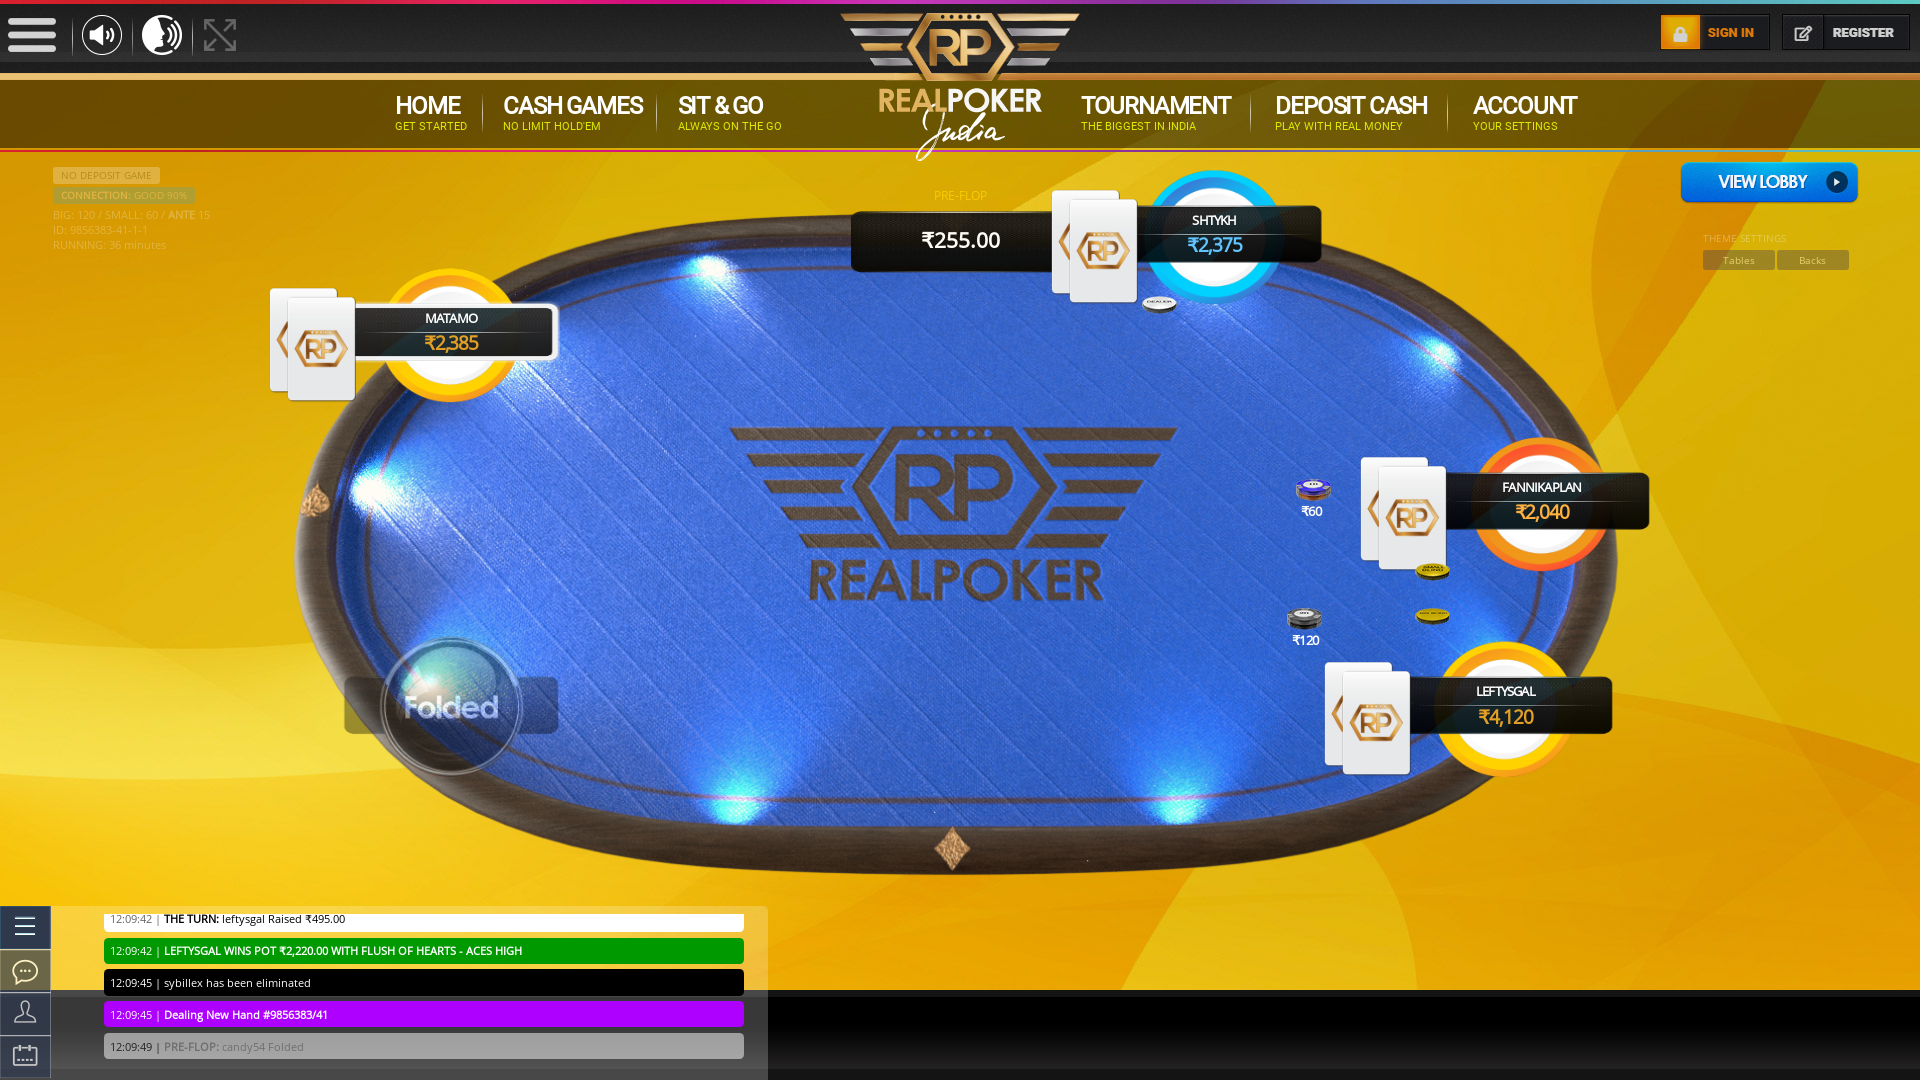 Rohini poker table on a 10 player table in the 36th minute